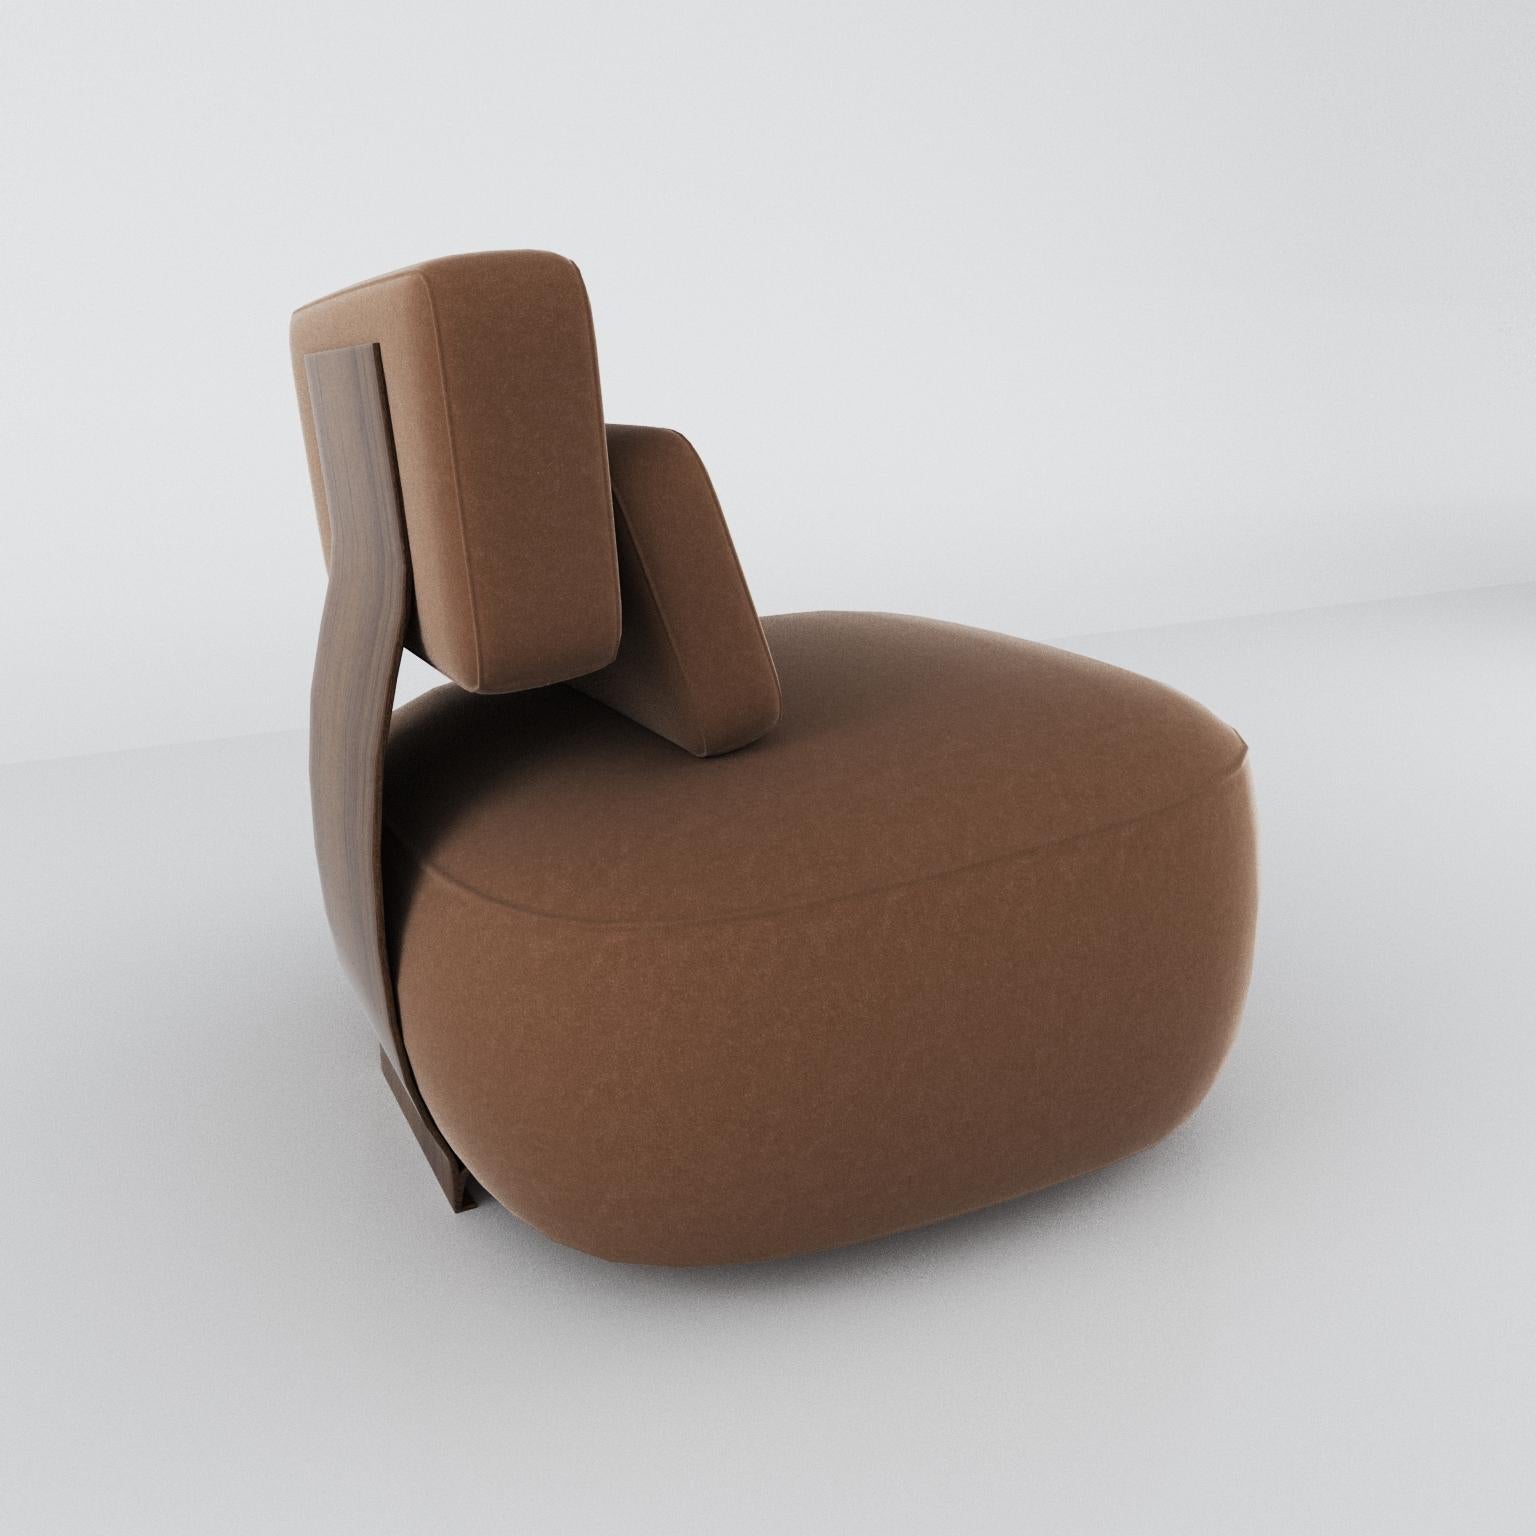 Winding chair has a sophisticated design to improve your décor and add a modern layout to the ambient.

Item Finish:
UPHOLSTERY AND PILLOW: FABRIC Caramel - 965023 S
BACKREST STRUCTURE: Dark Gray 

NOTE: THE IMAGES ARE ILLUSTRATIVE, THE FINISHES ARE